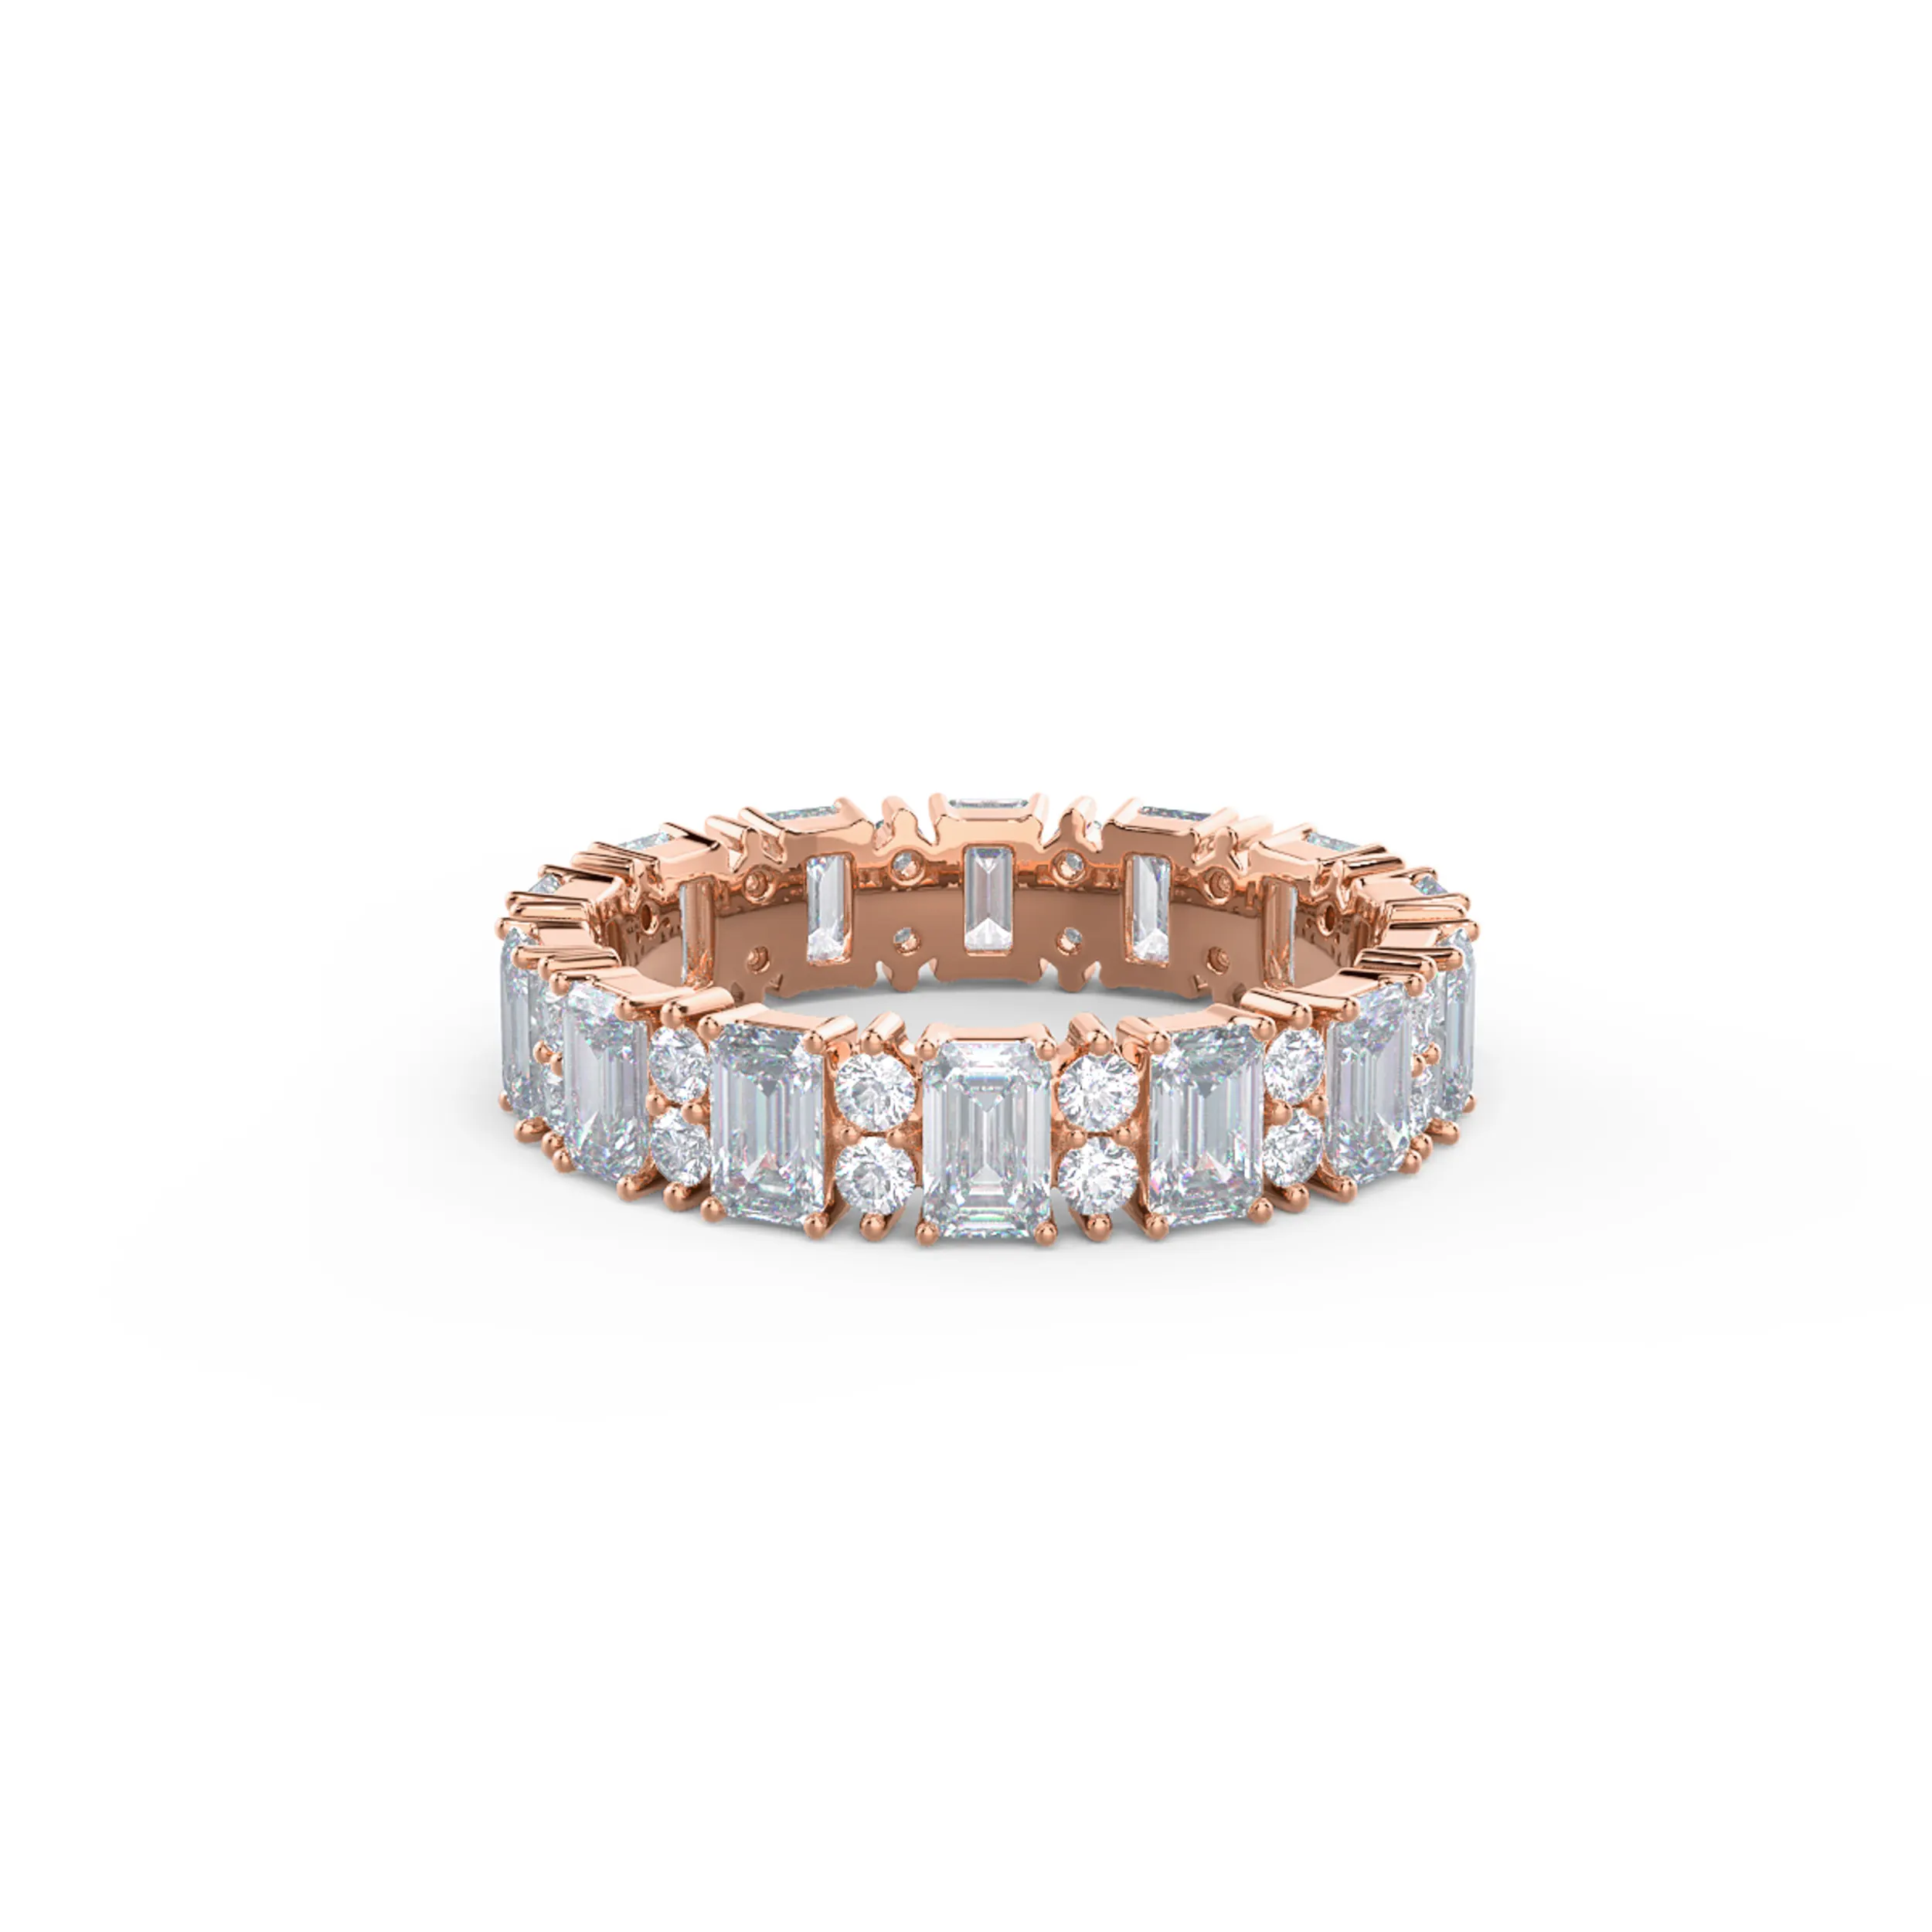 Exceptional Quality 3.3 Carat Lab Diamonds Emerald and Round Eternity Band in 14k Rose Gold (Main View)